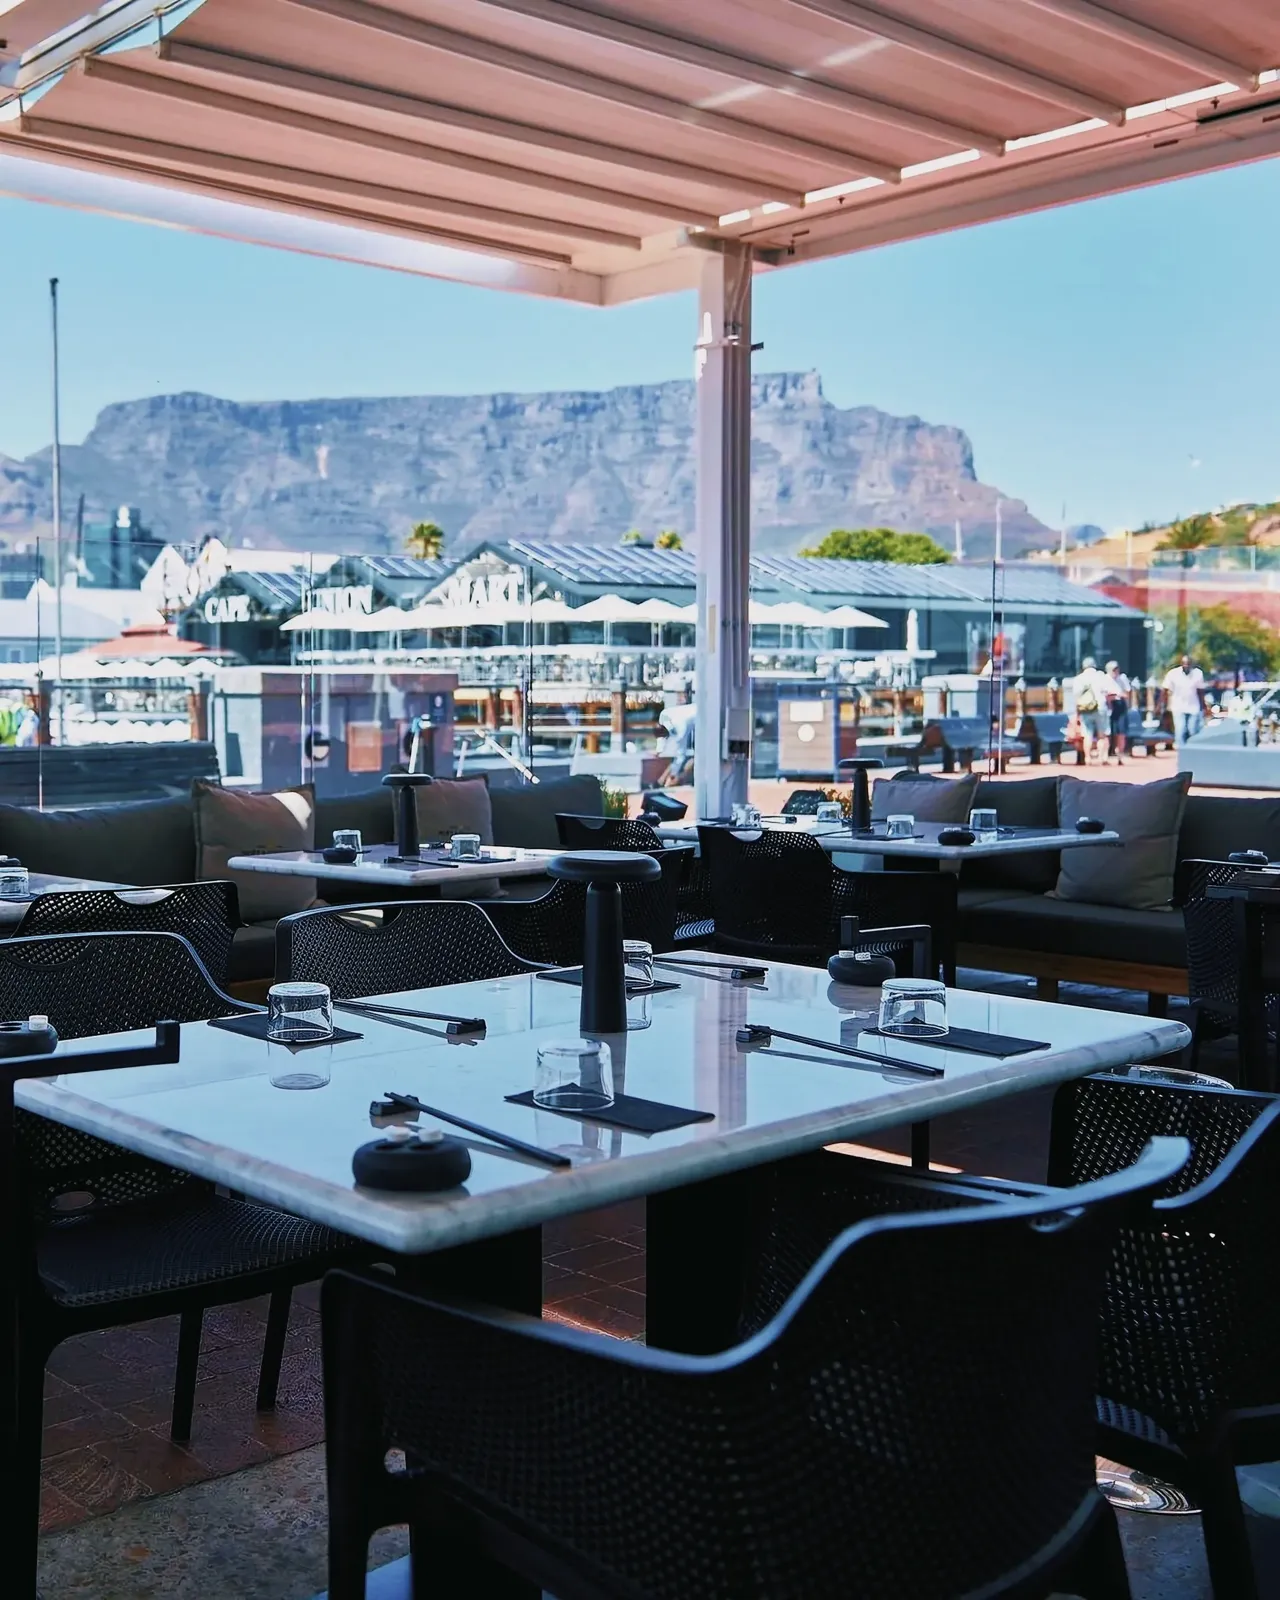 Table Mountain from V&A Waterfront